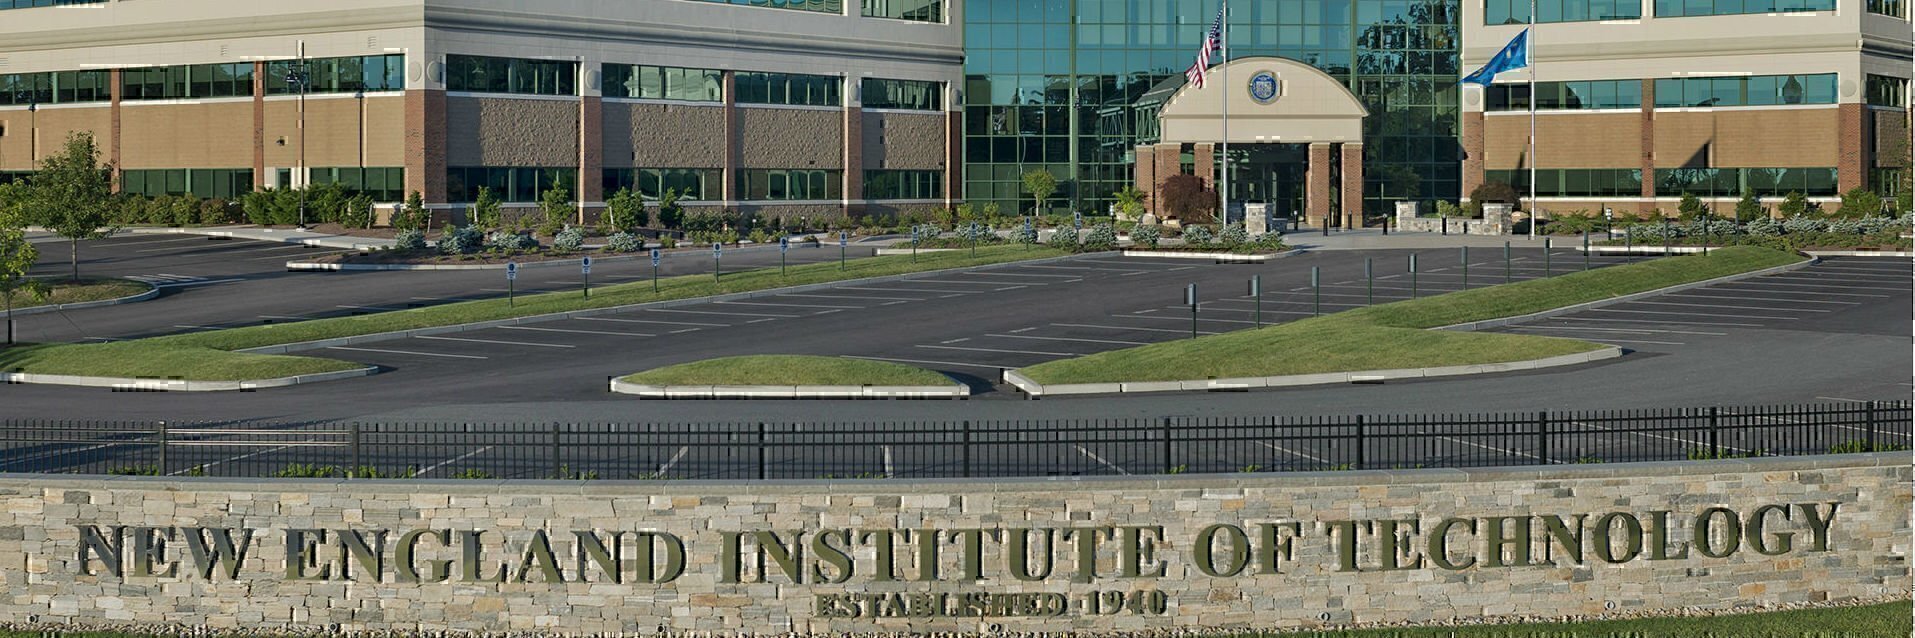 new england institute of technology schools for veterans